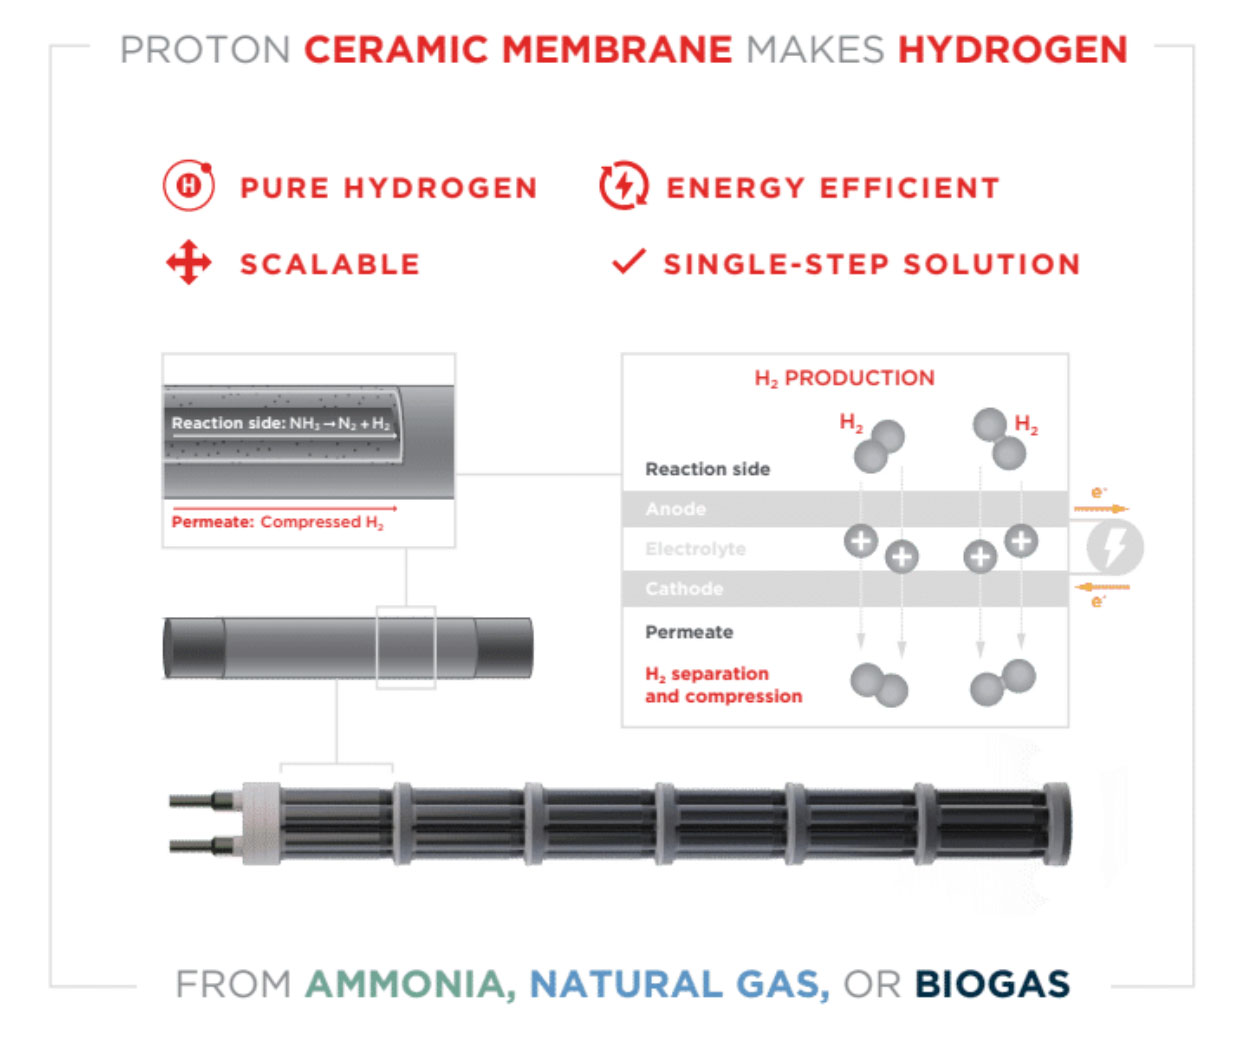 This figure shows the principles behind the new ceramic membrane used in the production of hydrogen